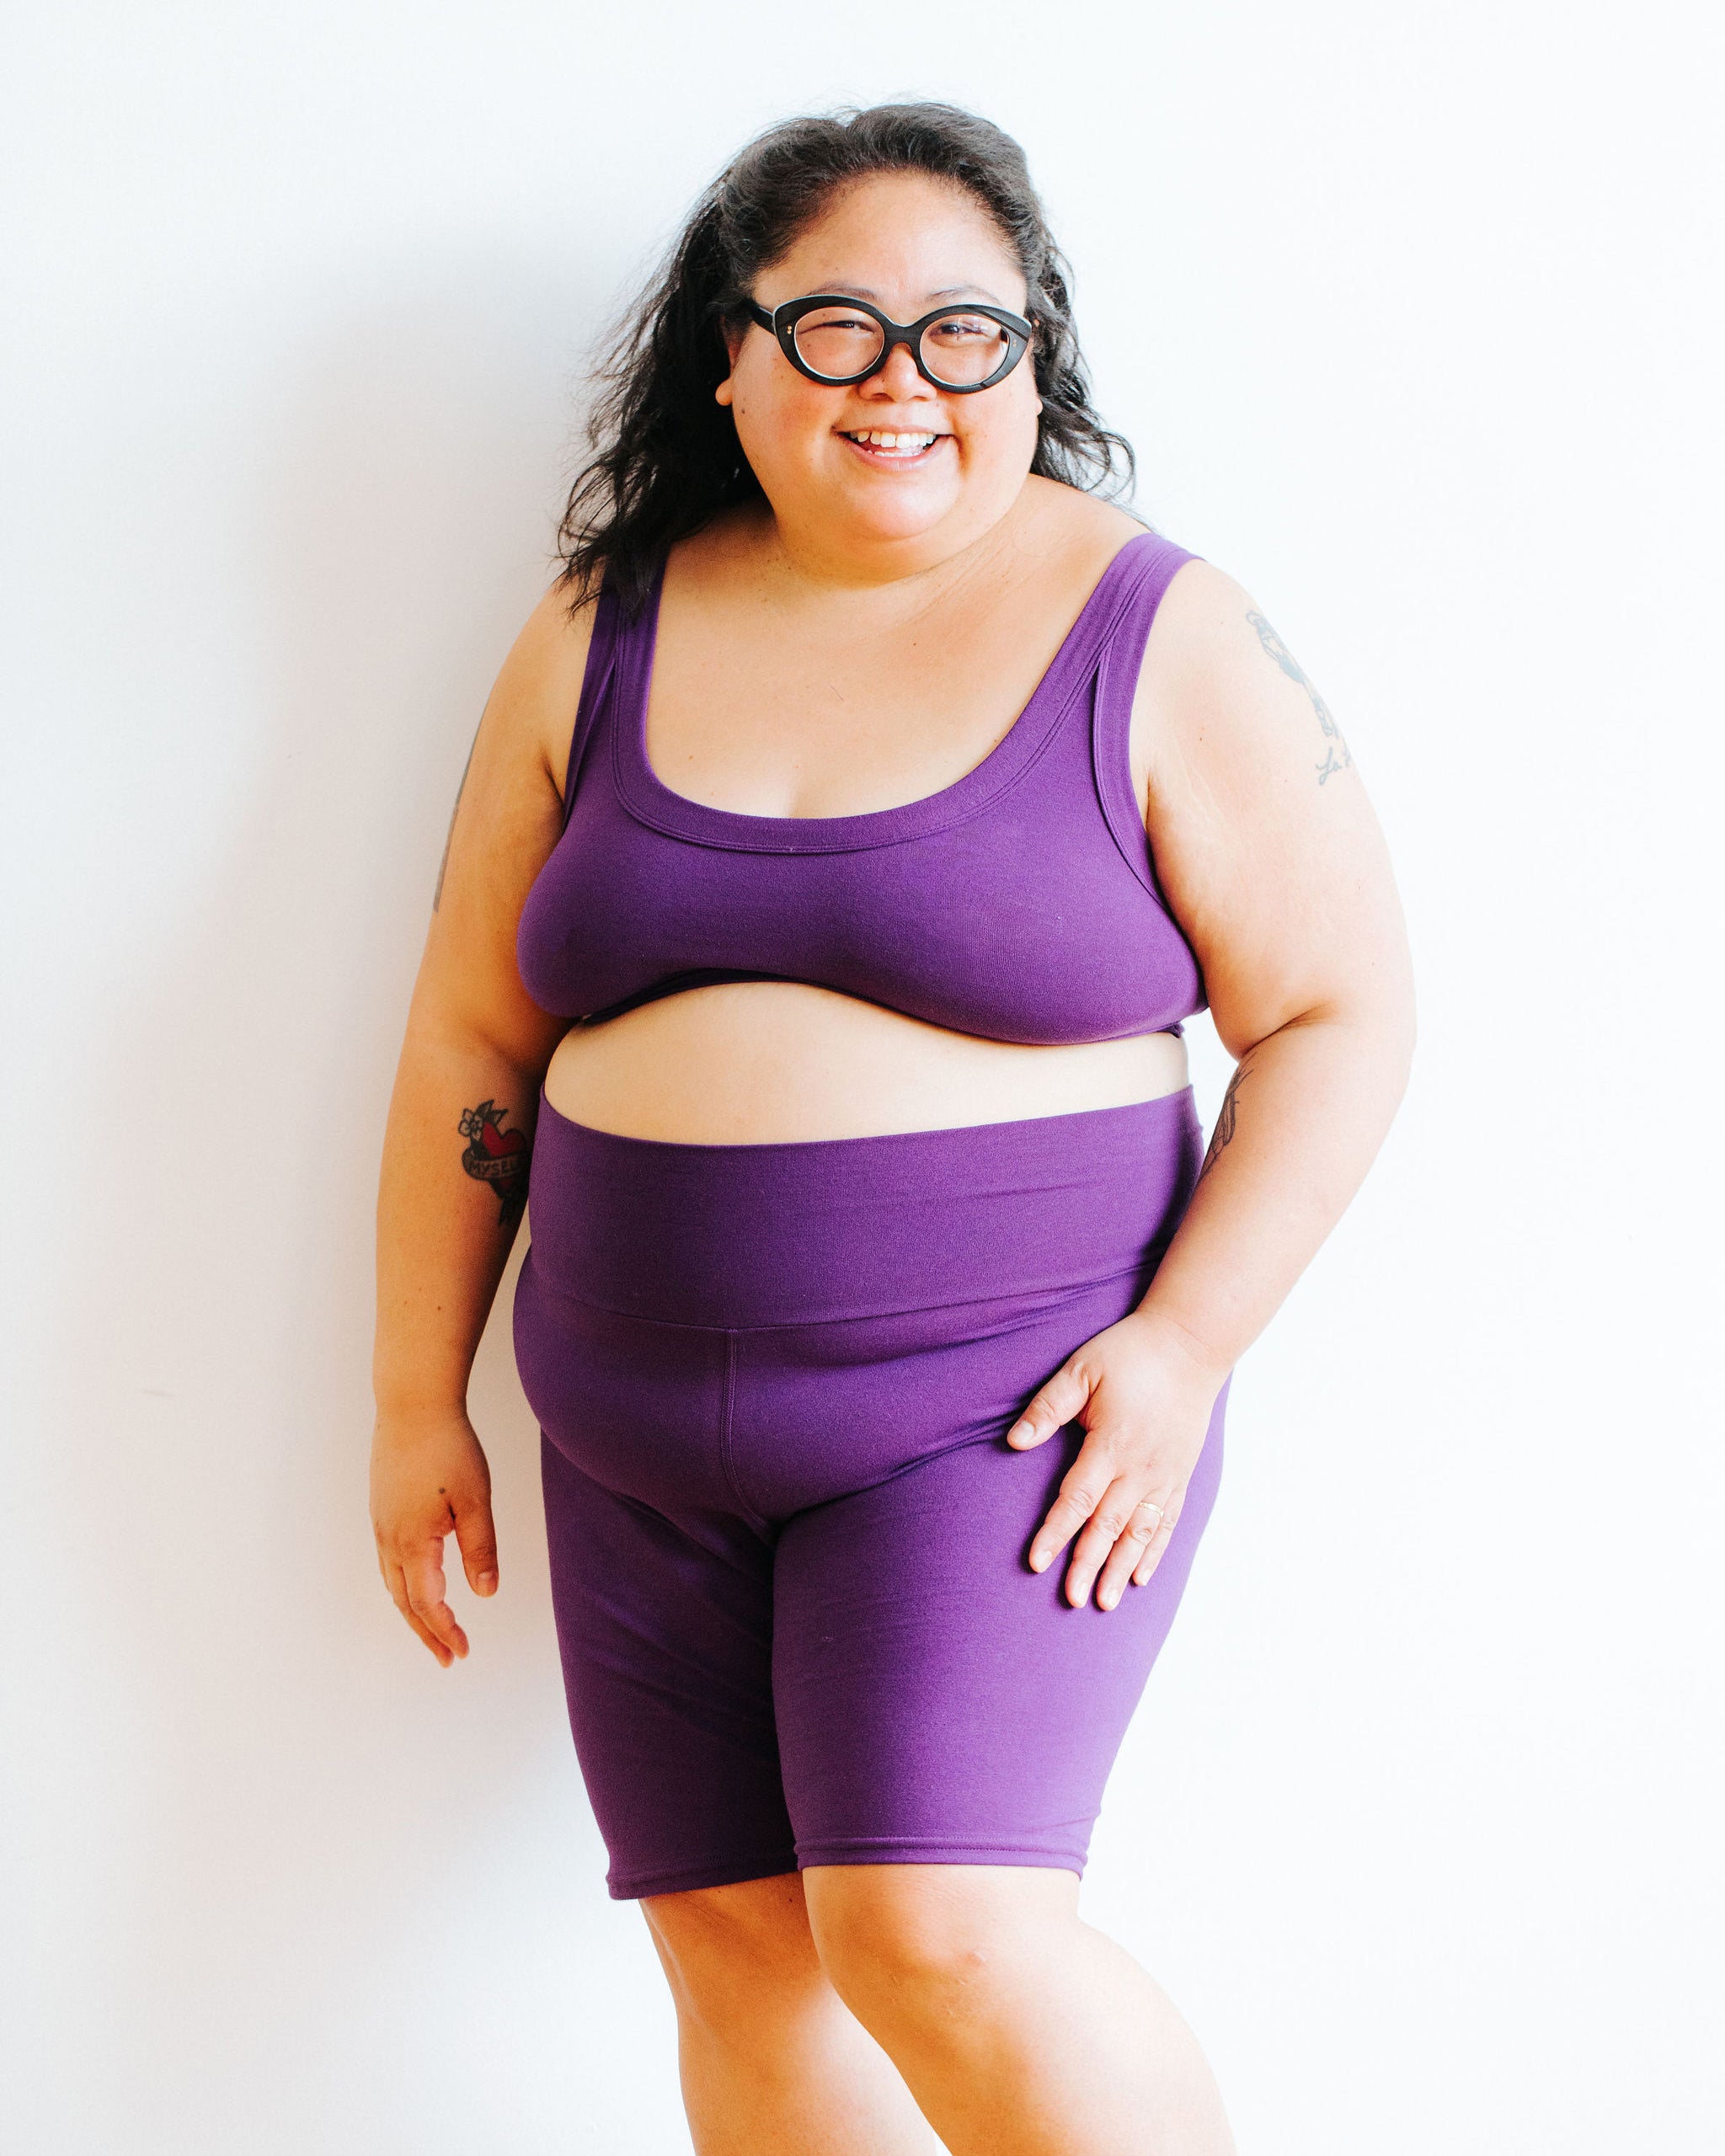 Model smiling while wearing a Bralette and Bike Shorts both in Deep Amethyst.